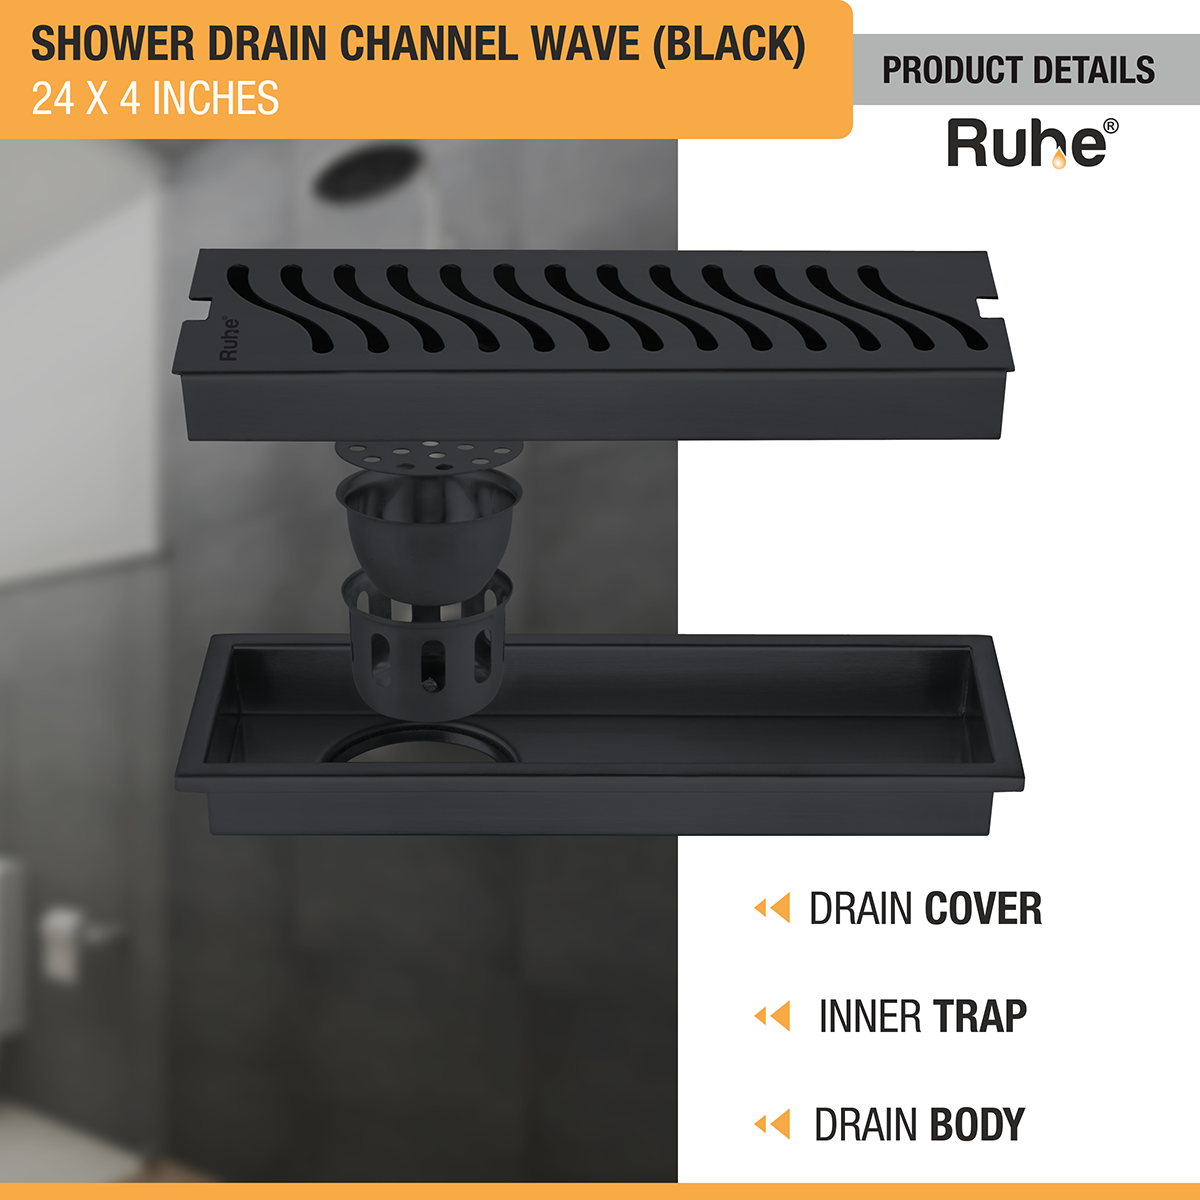 Wave Shower Drain Channel (24 x 4 Inches) Black PVD Coated with drain cover, inner insect trap, drain body